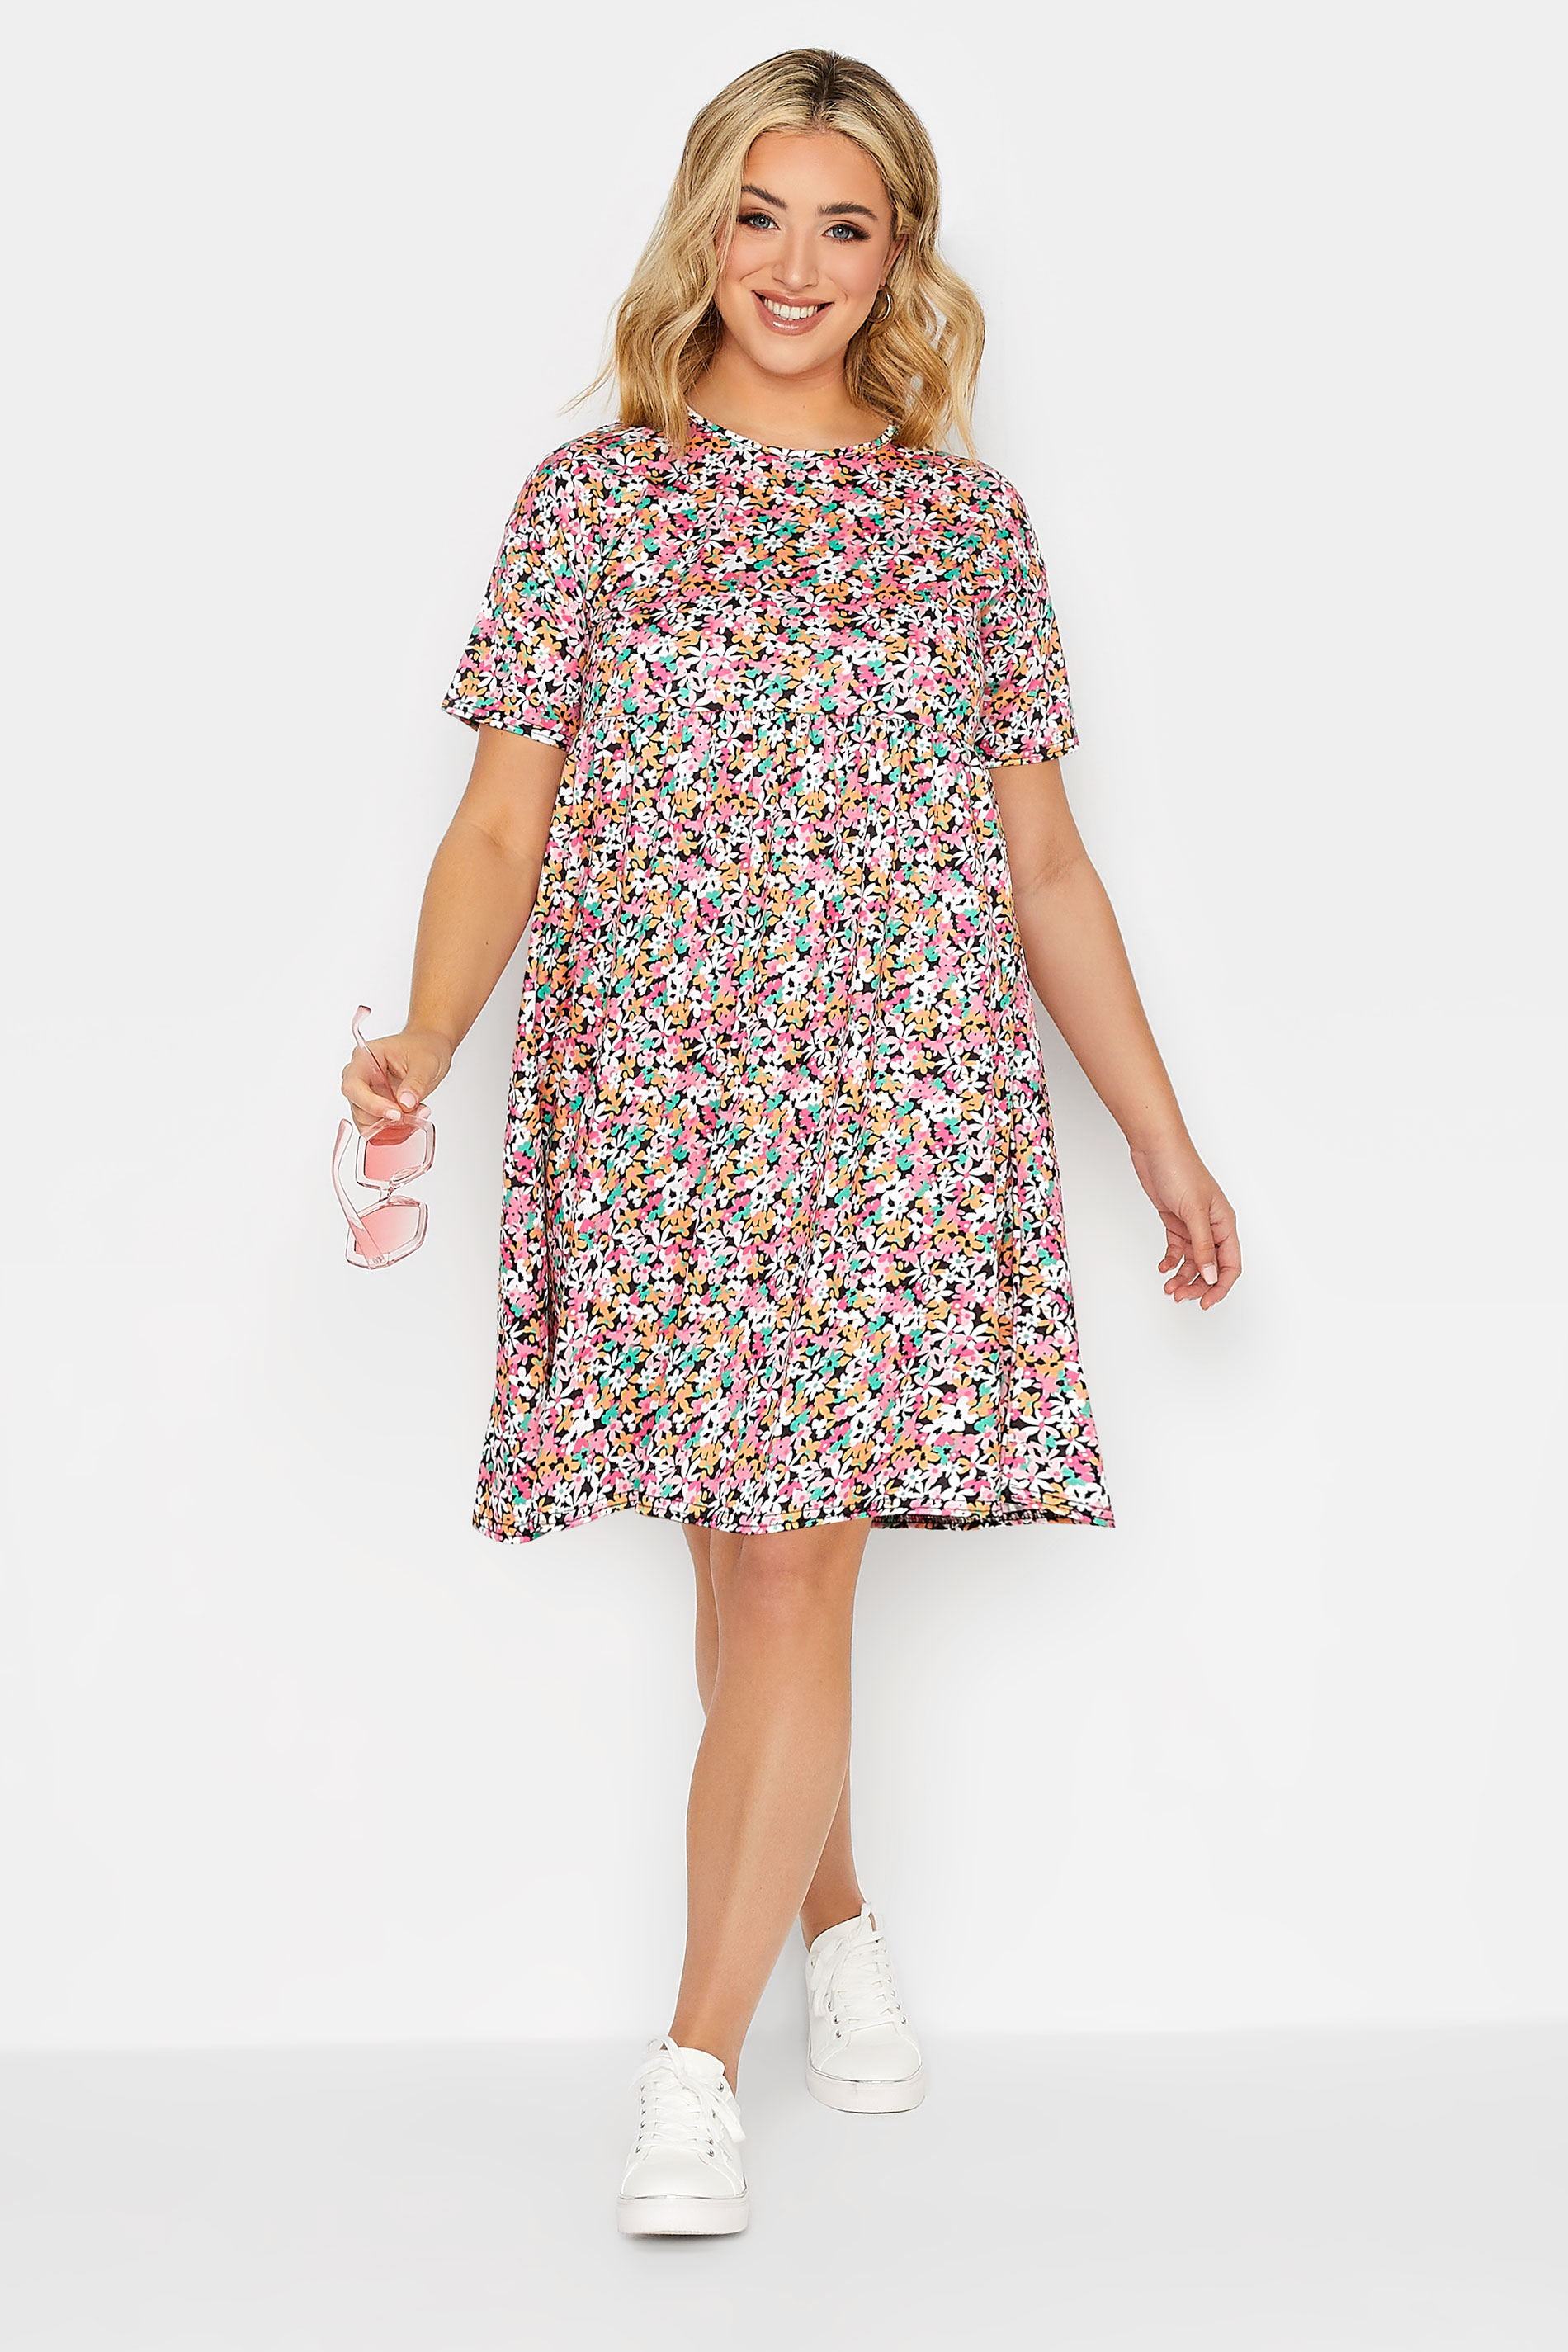 YOURS PETITE Plus Size Pink Ditsy Floral Print Smock Dress | Yours Clothing 1